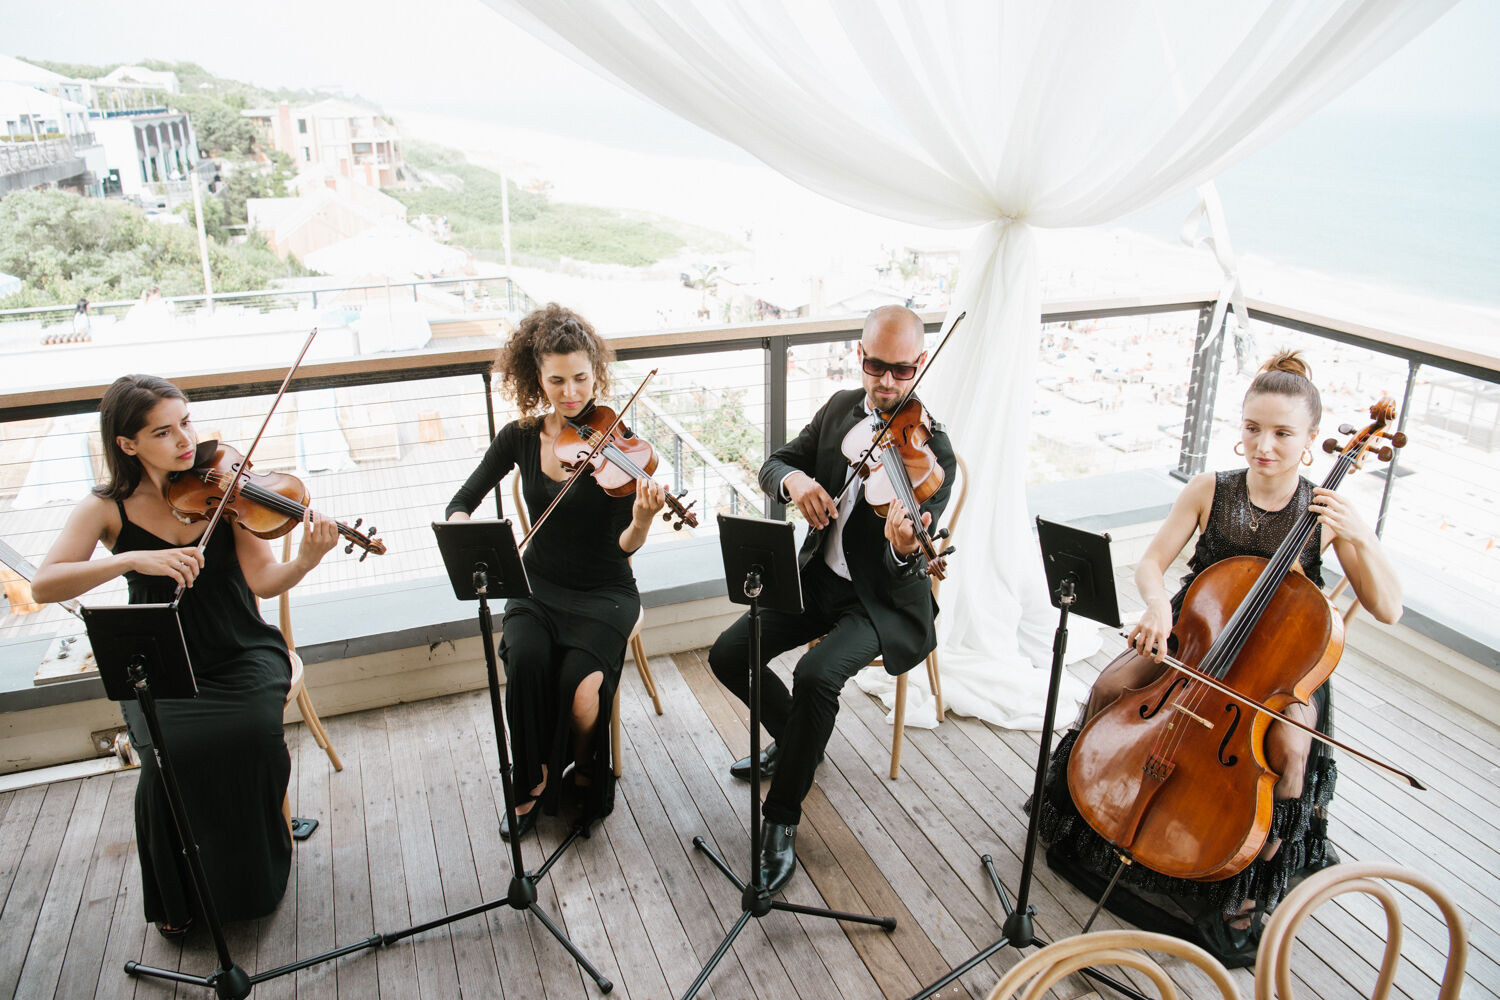 Learn more about the wedding musician from Hannah & Tyler's modern wedding